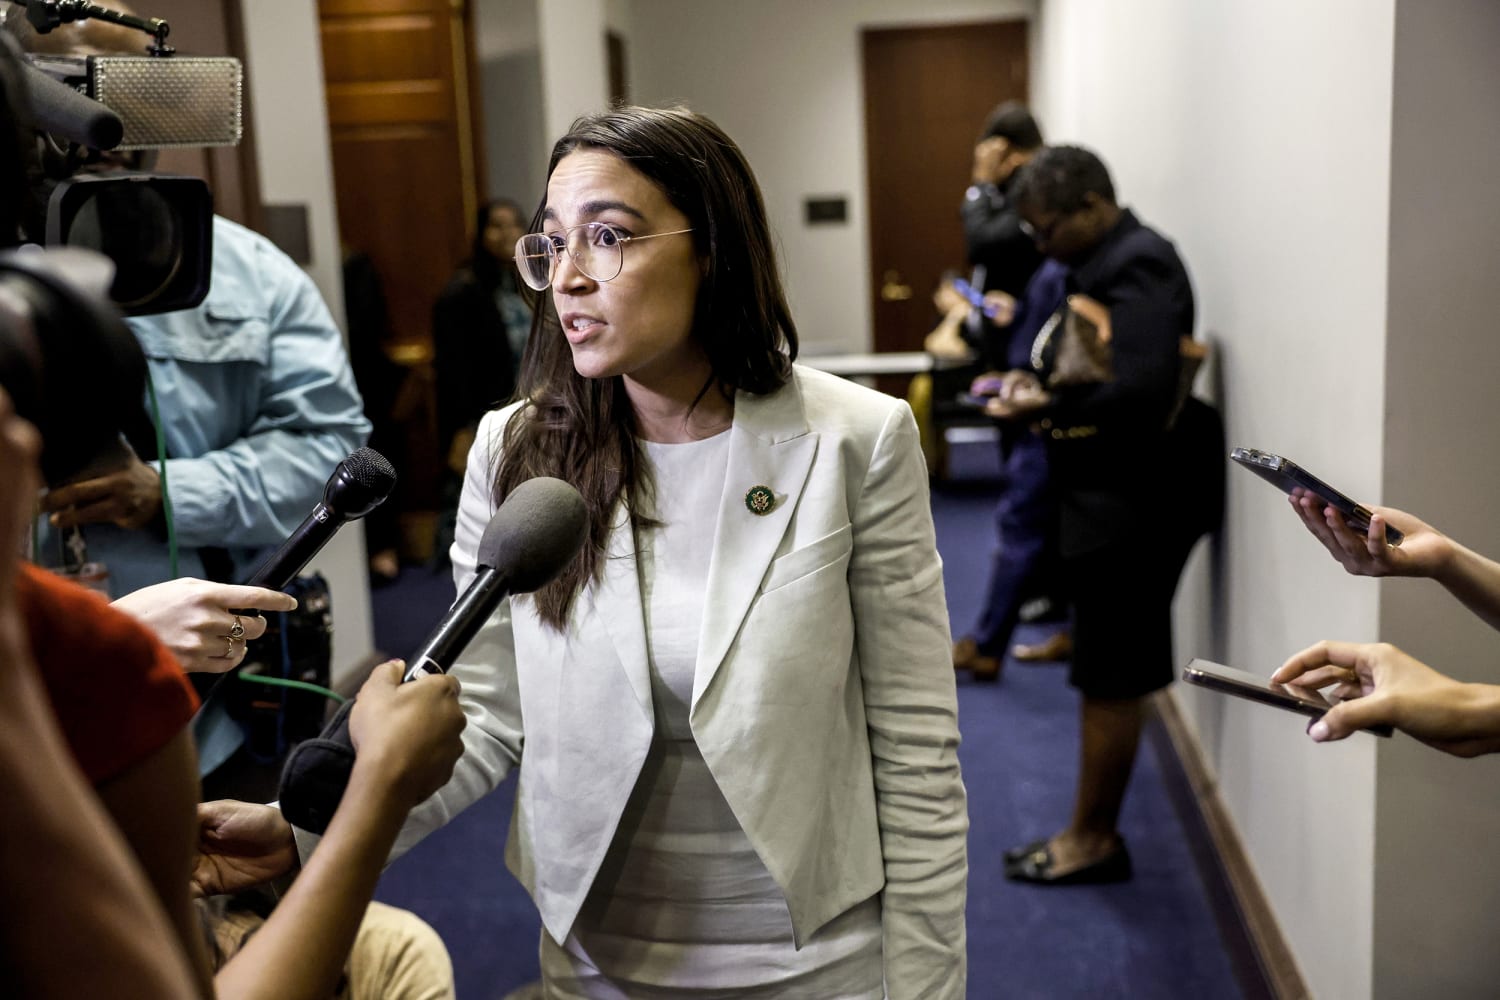 Democratic Reps. Ocasio-Cortez, Khanna and Jayapal say they'll vote 'no' on debt deal